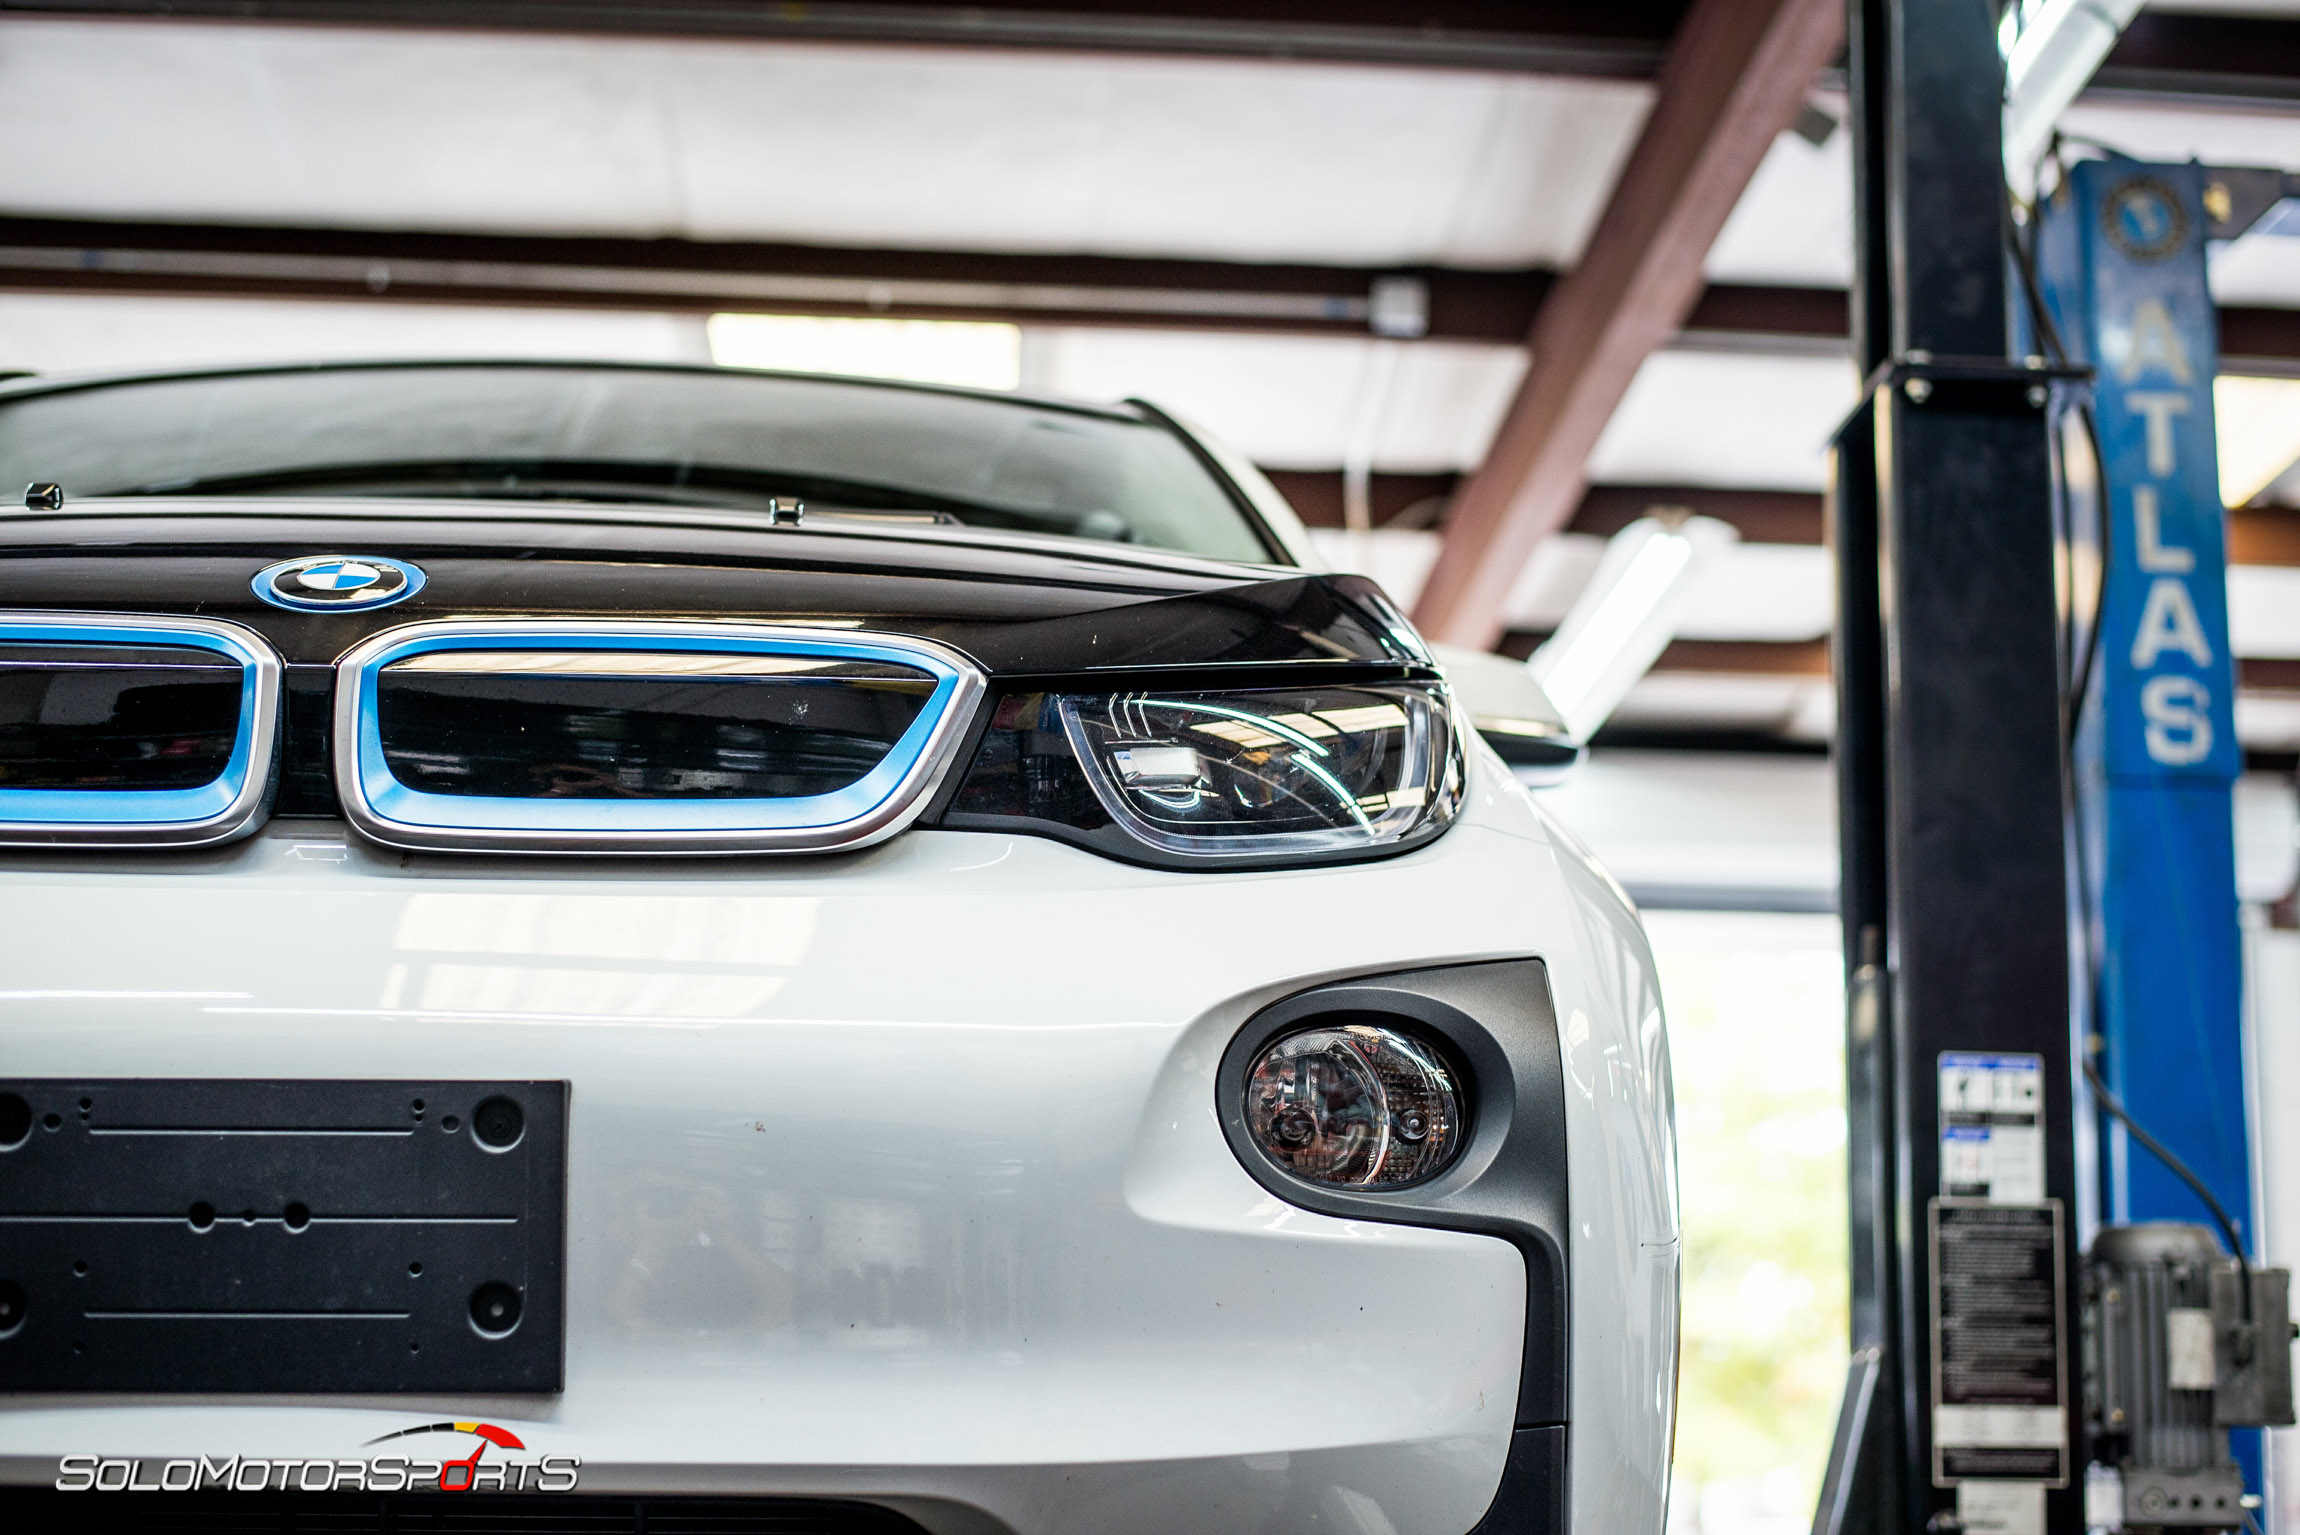 bmw i3 instant torque battery operated bmw power in for new tires alignment and maintenance bmw mainetance bmw repair